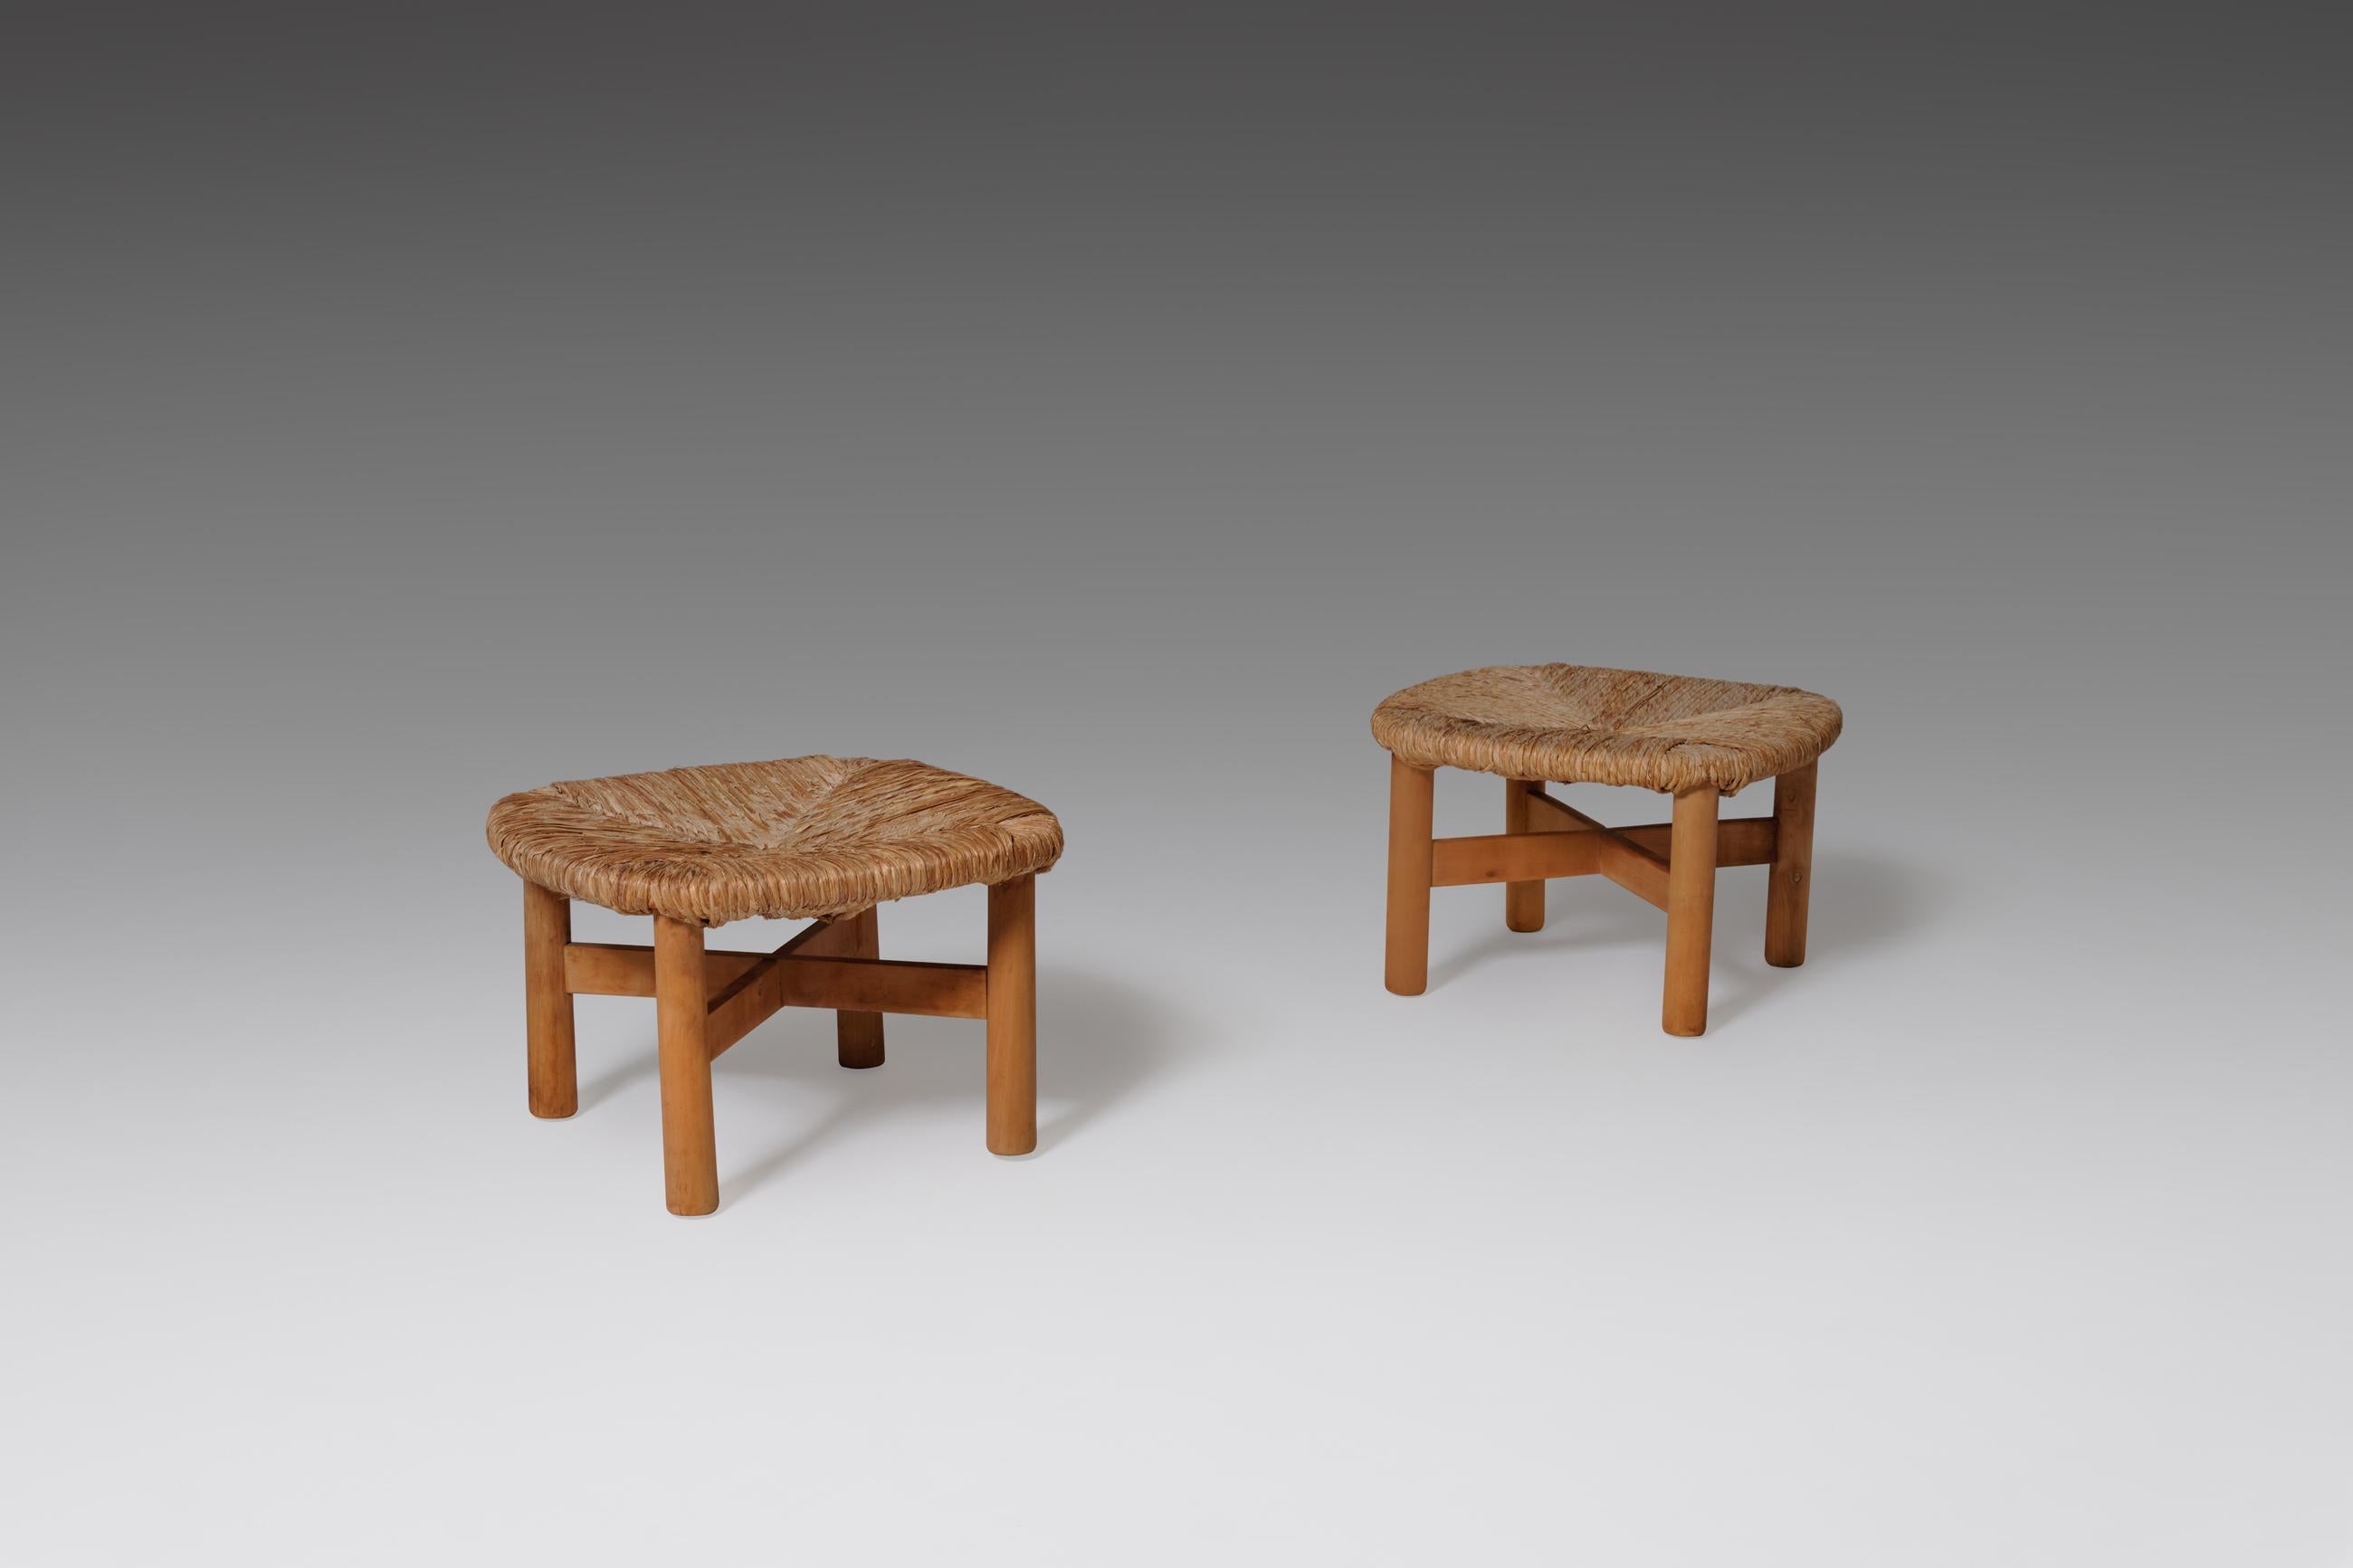 Set of two rustic stools designed by Lorenzo Forges Davanzati, Italy, 1950s. The stools have a nice unfinished modest cedar wooden frame with a beautiful refined woven rush seat.
The materials provides a cosy and rustic appearance, the refined